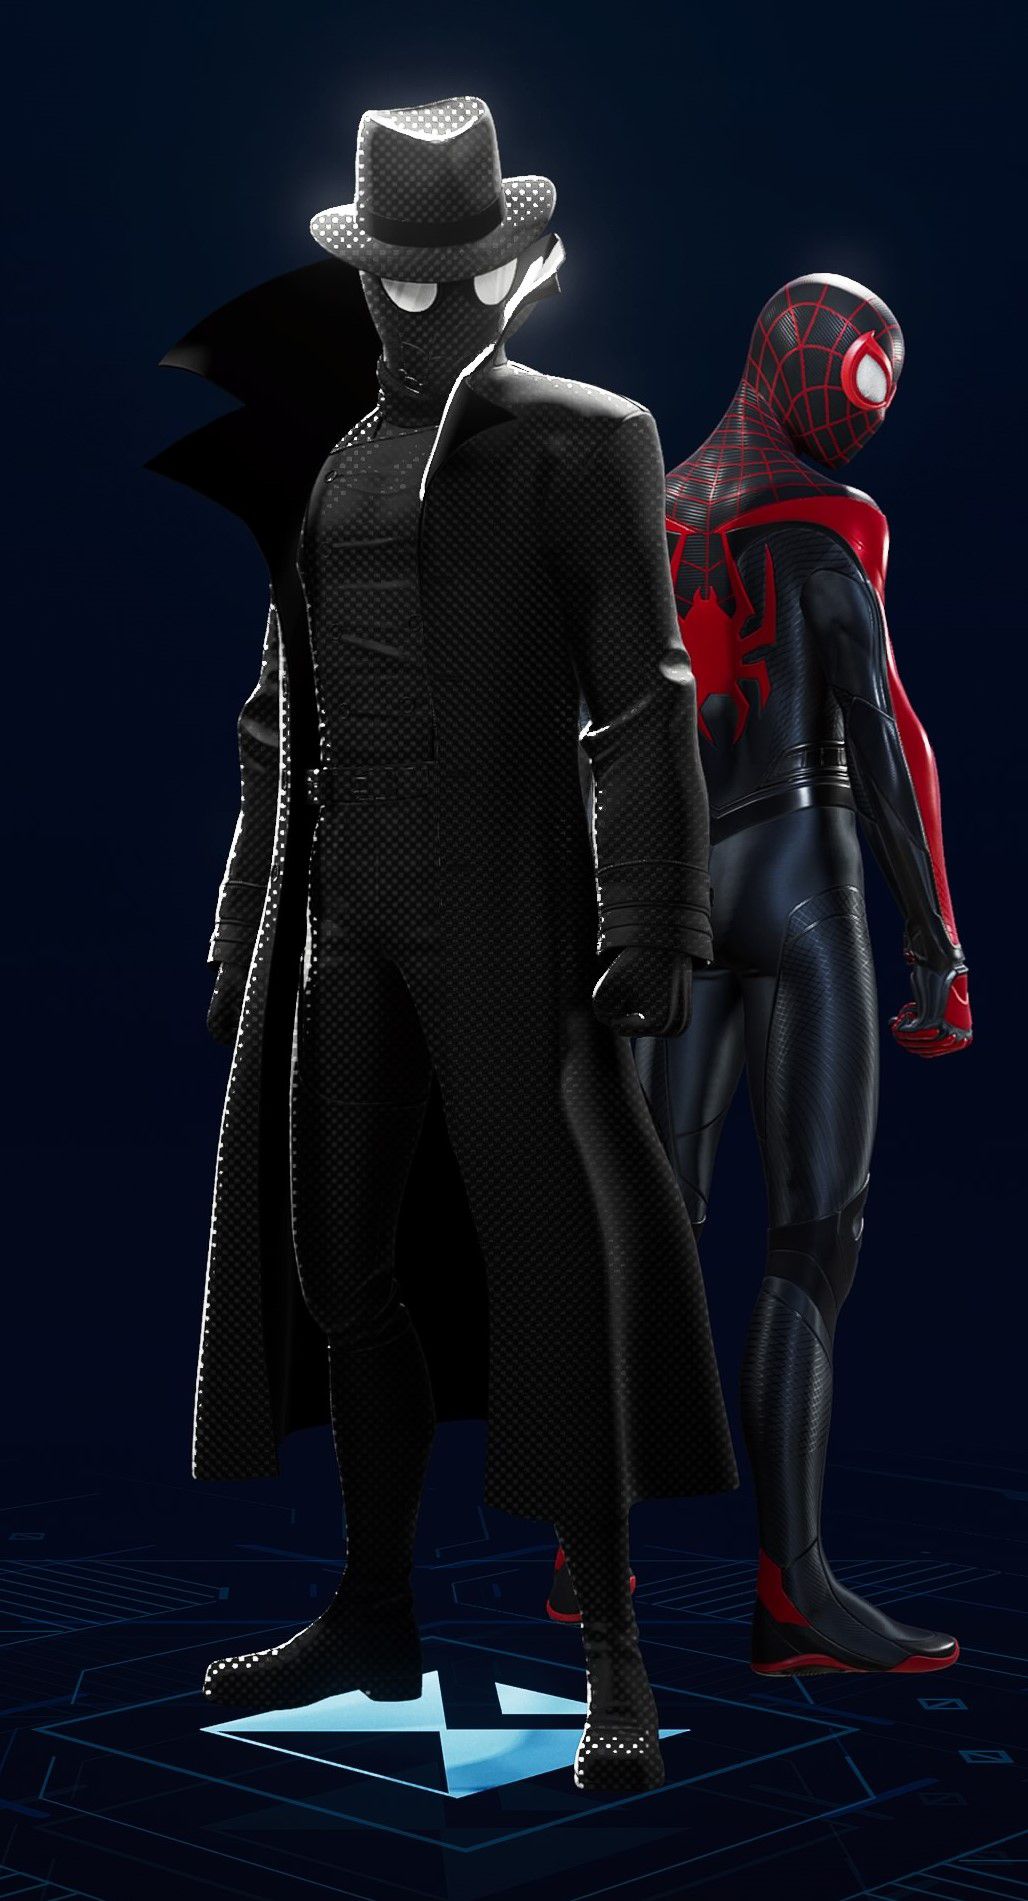 Peter Parker stands in his Into the Spider-Verse Noir Suit in the suit selection screen of Spider-Man 2.